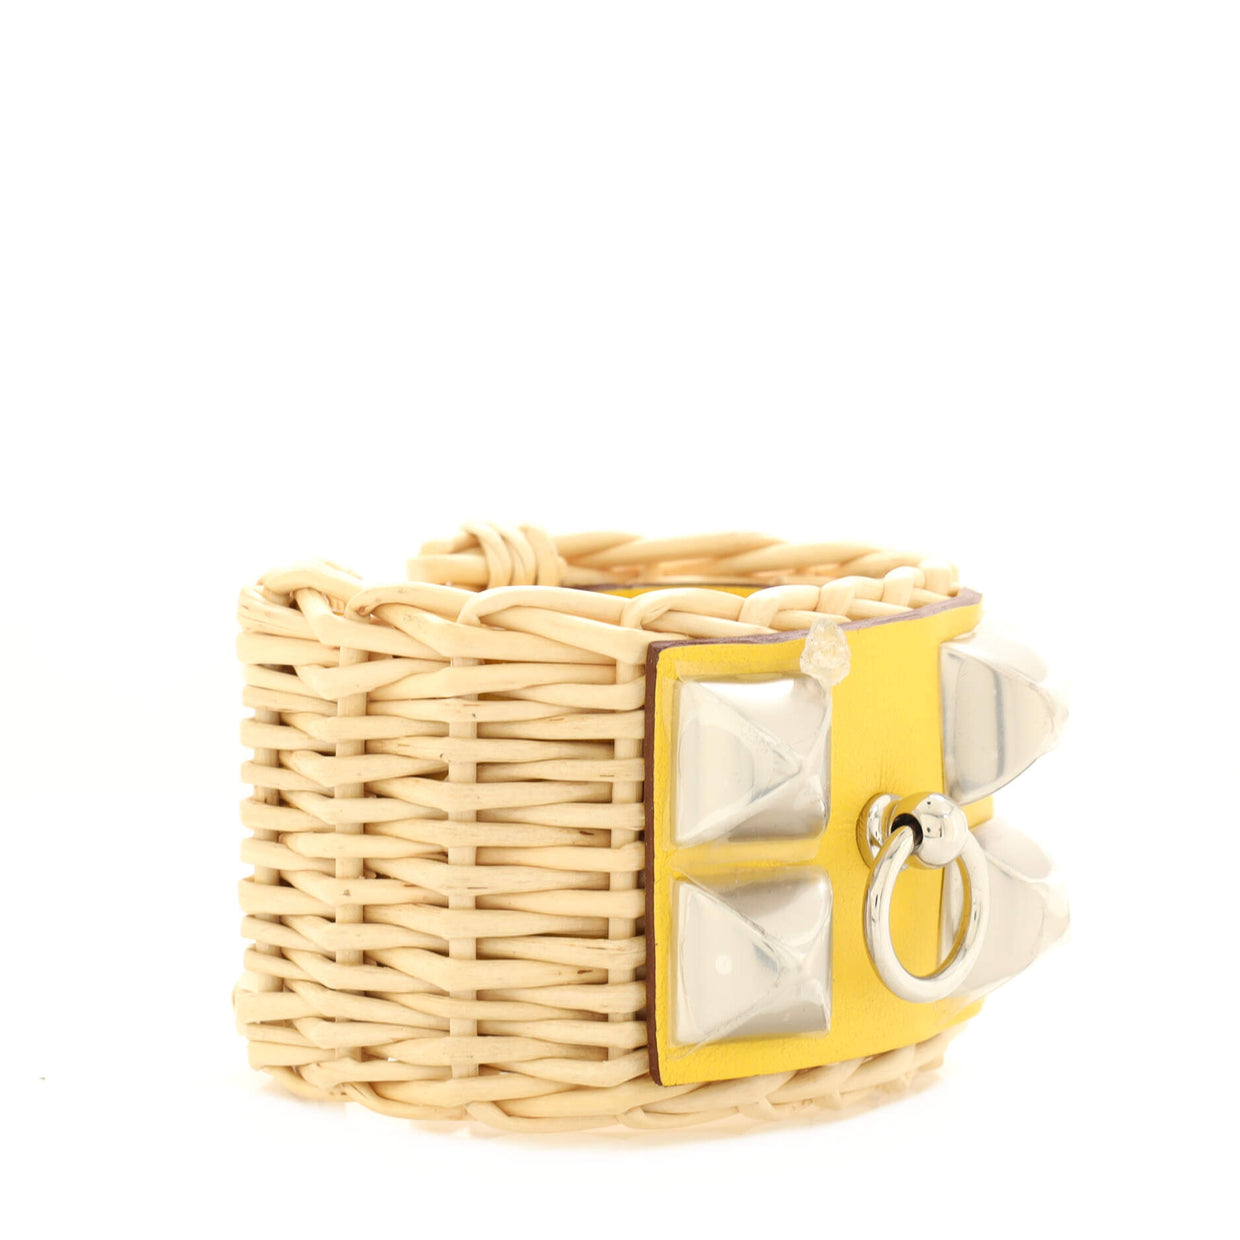 Hermes Medor Picnic Cuff Bracelet Wicker and Leather Neutral 178364189